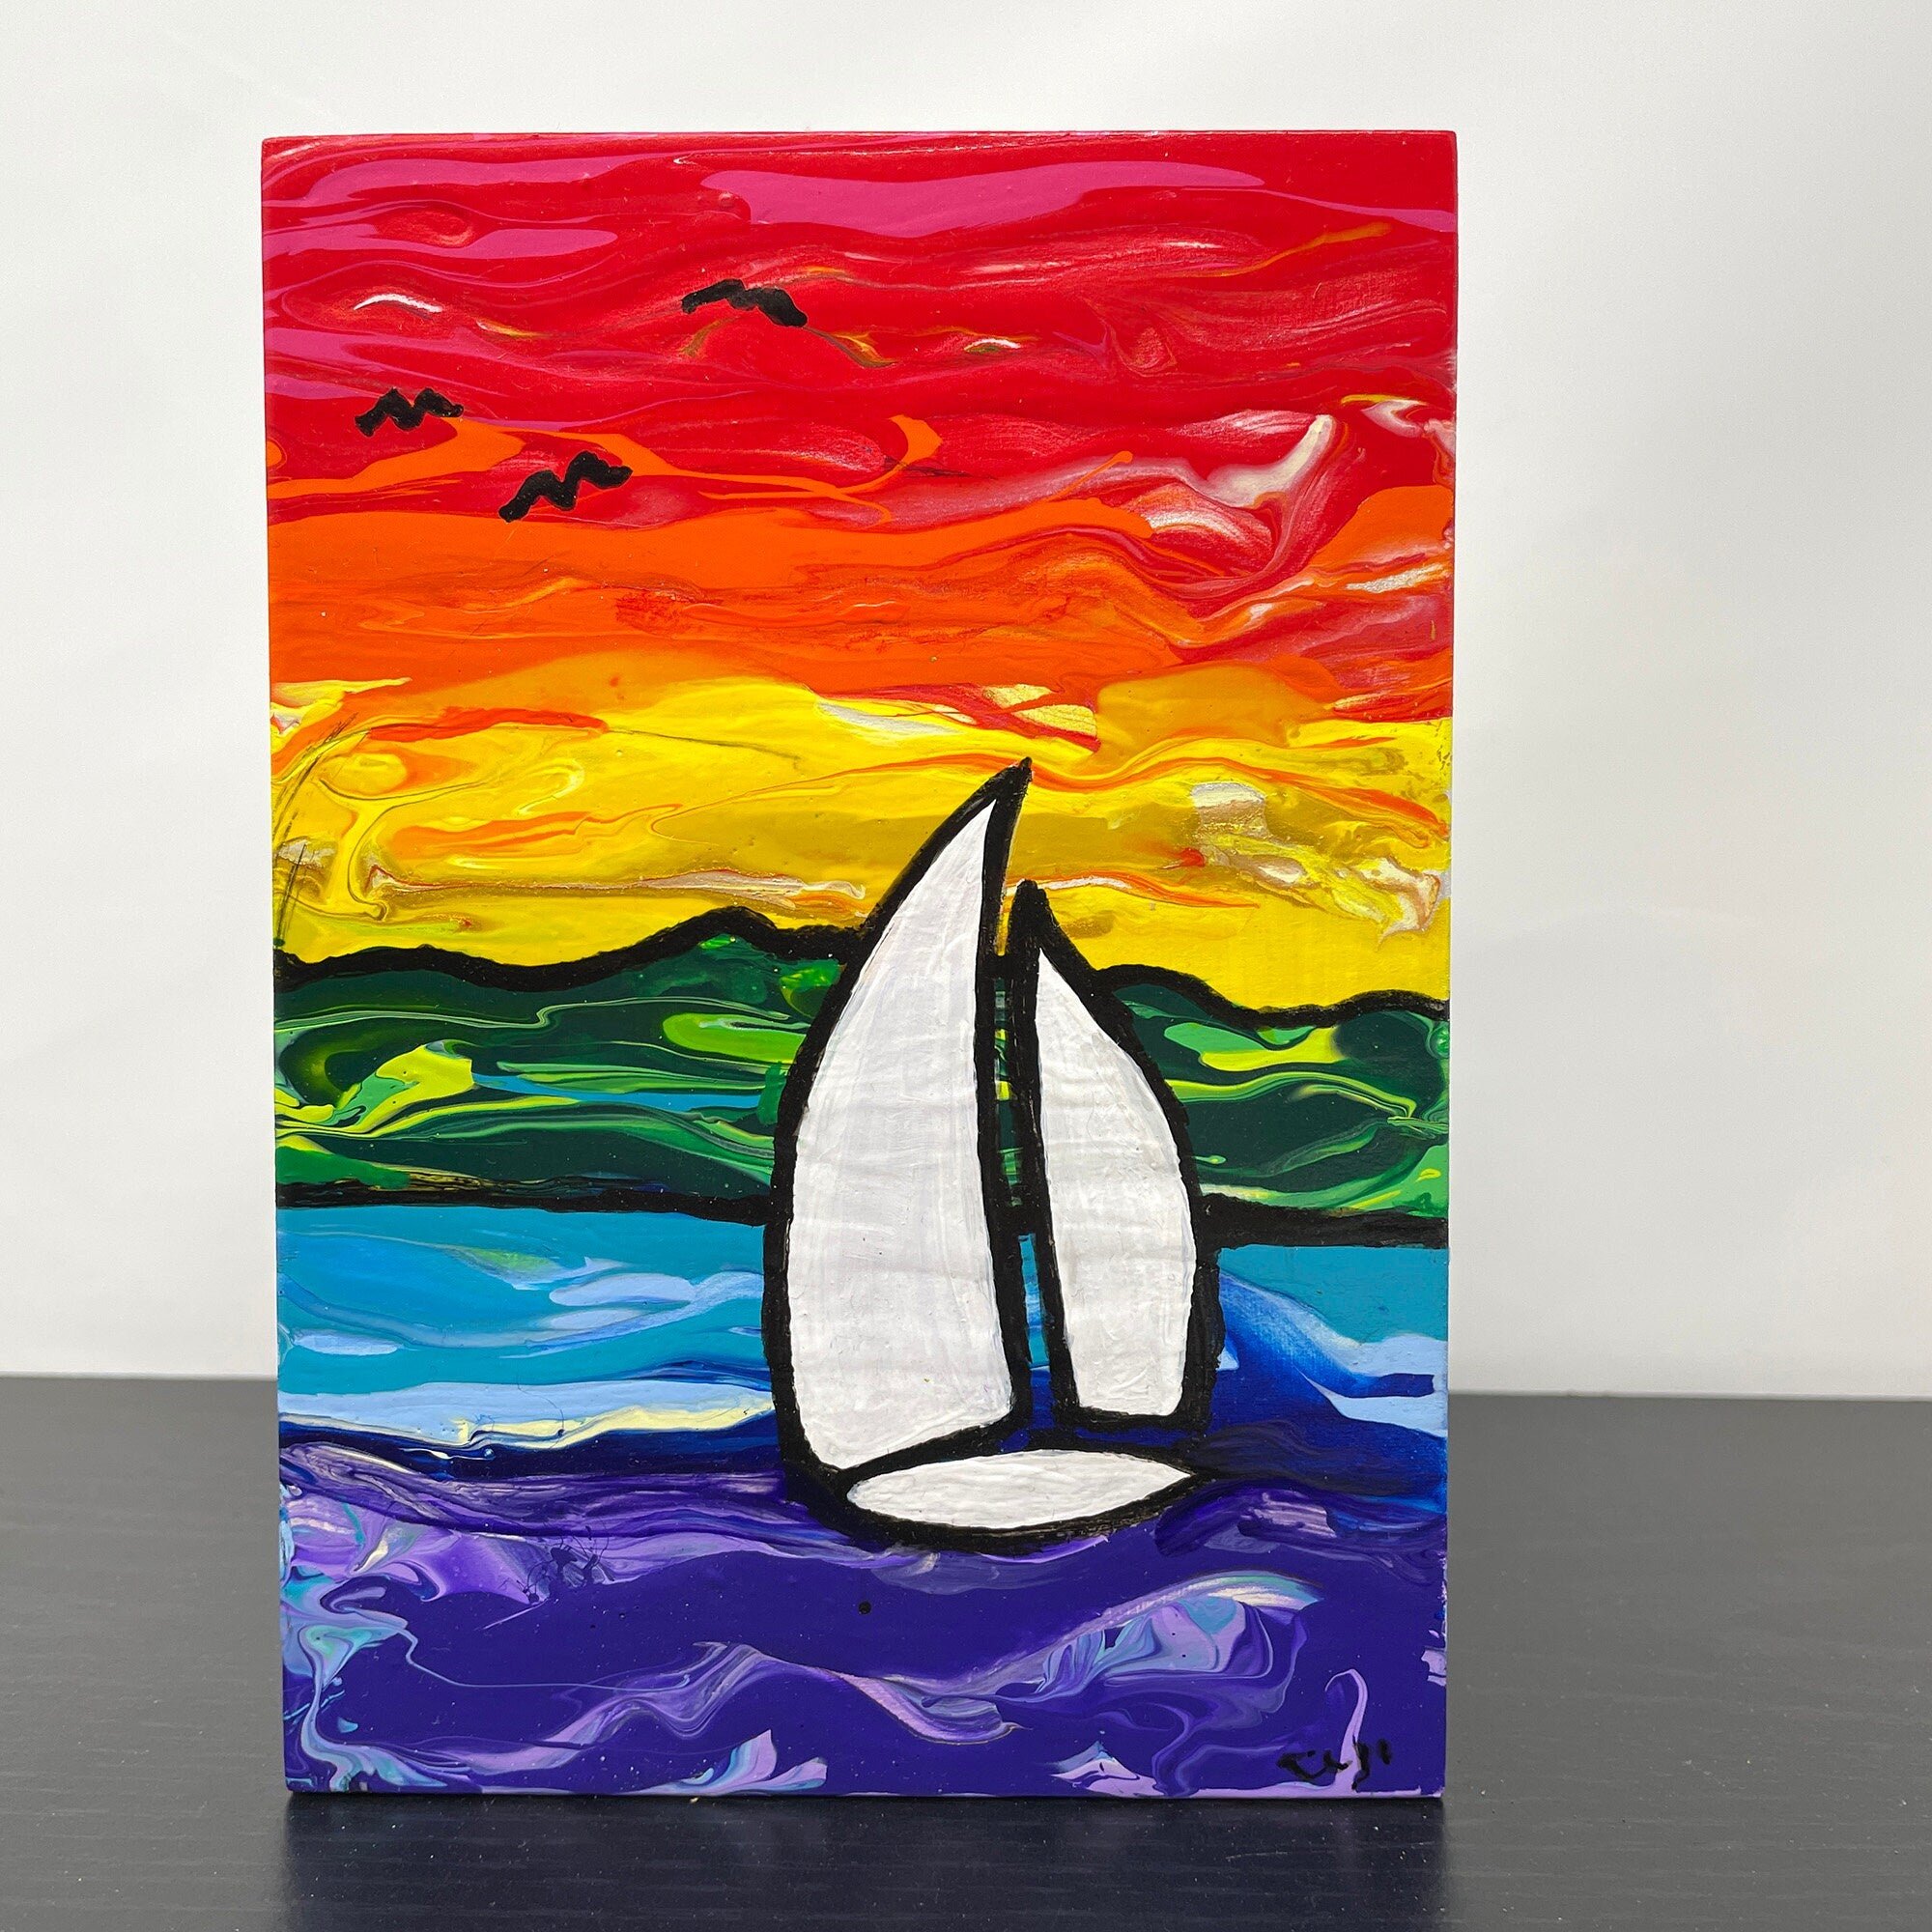 Rainbow Sailboat Painting - Original Acrylic Paint Pour Painting - 5x7 Inches - Nautical Art with Dramatic Sky - Sunrise, Sunset